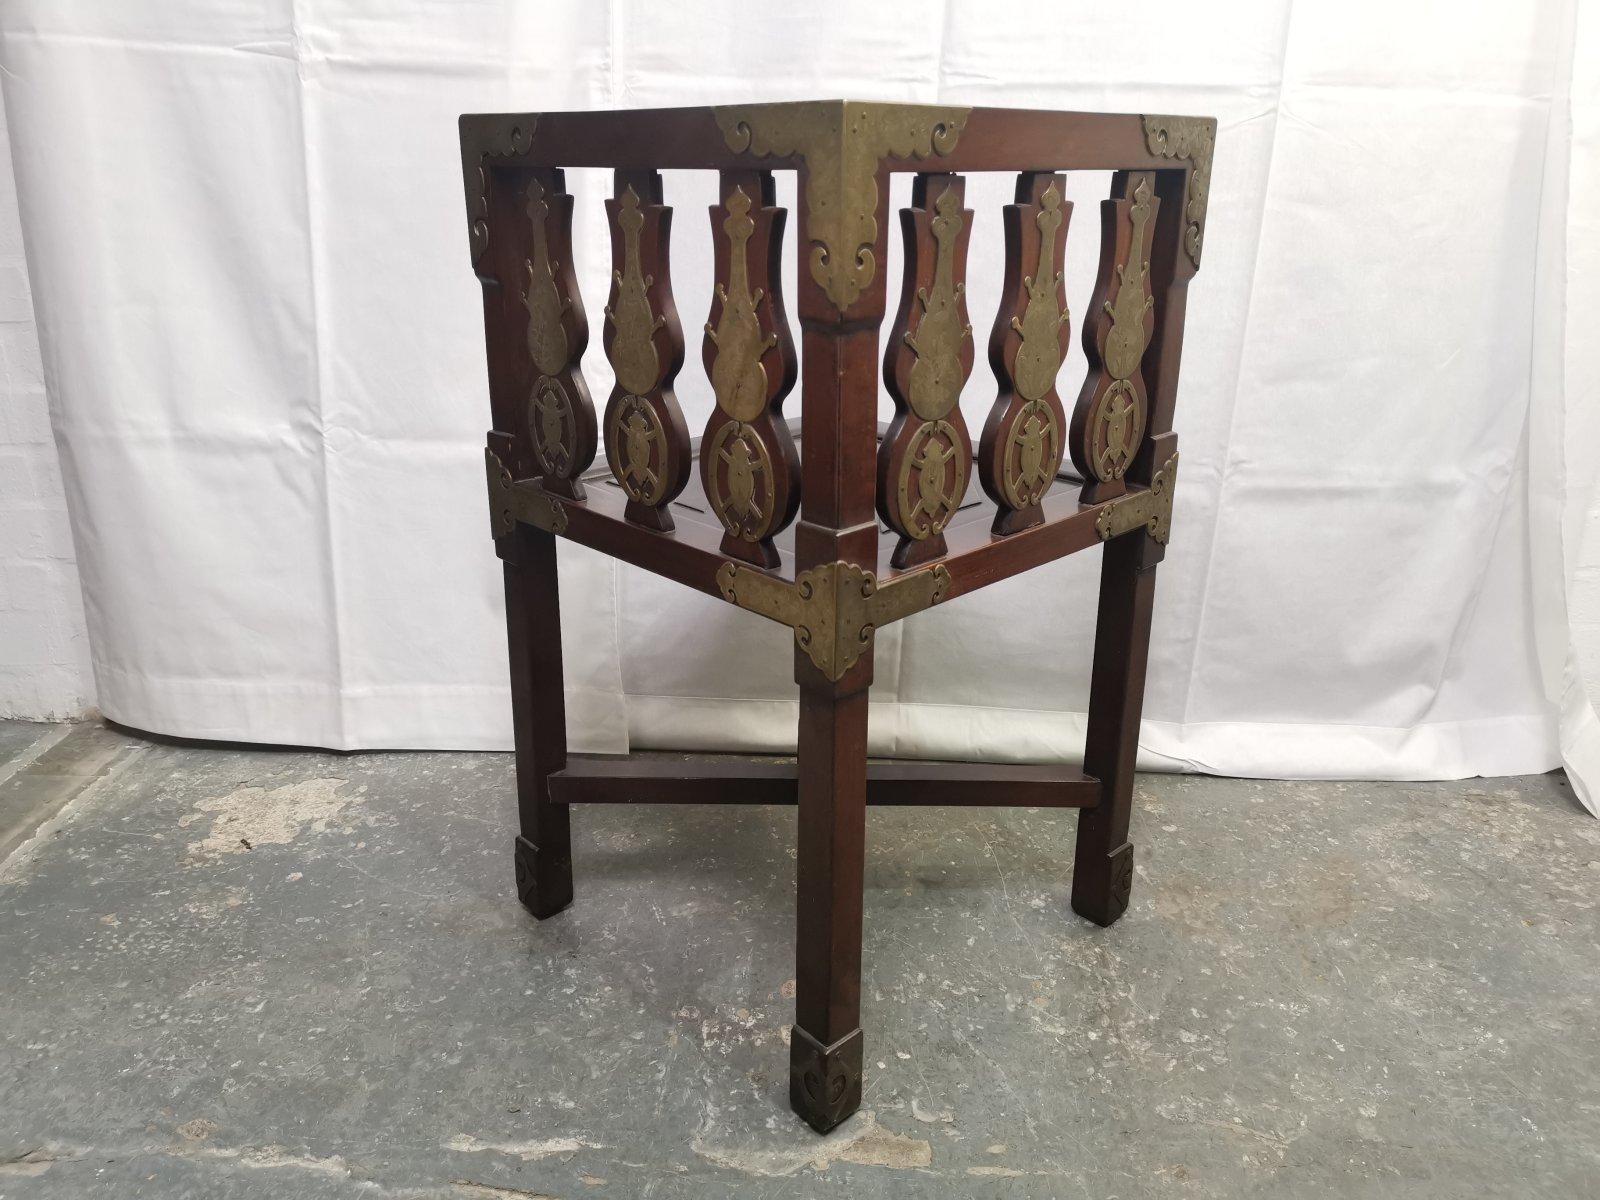 Hand-Crafted Japanese Rosewood Dining Table & 4 Chairs with Etched Decorative Brass Plaques. For Sale